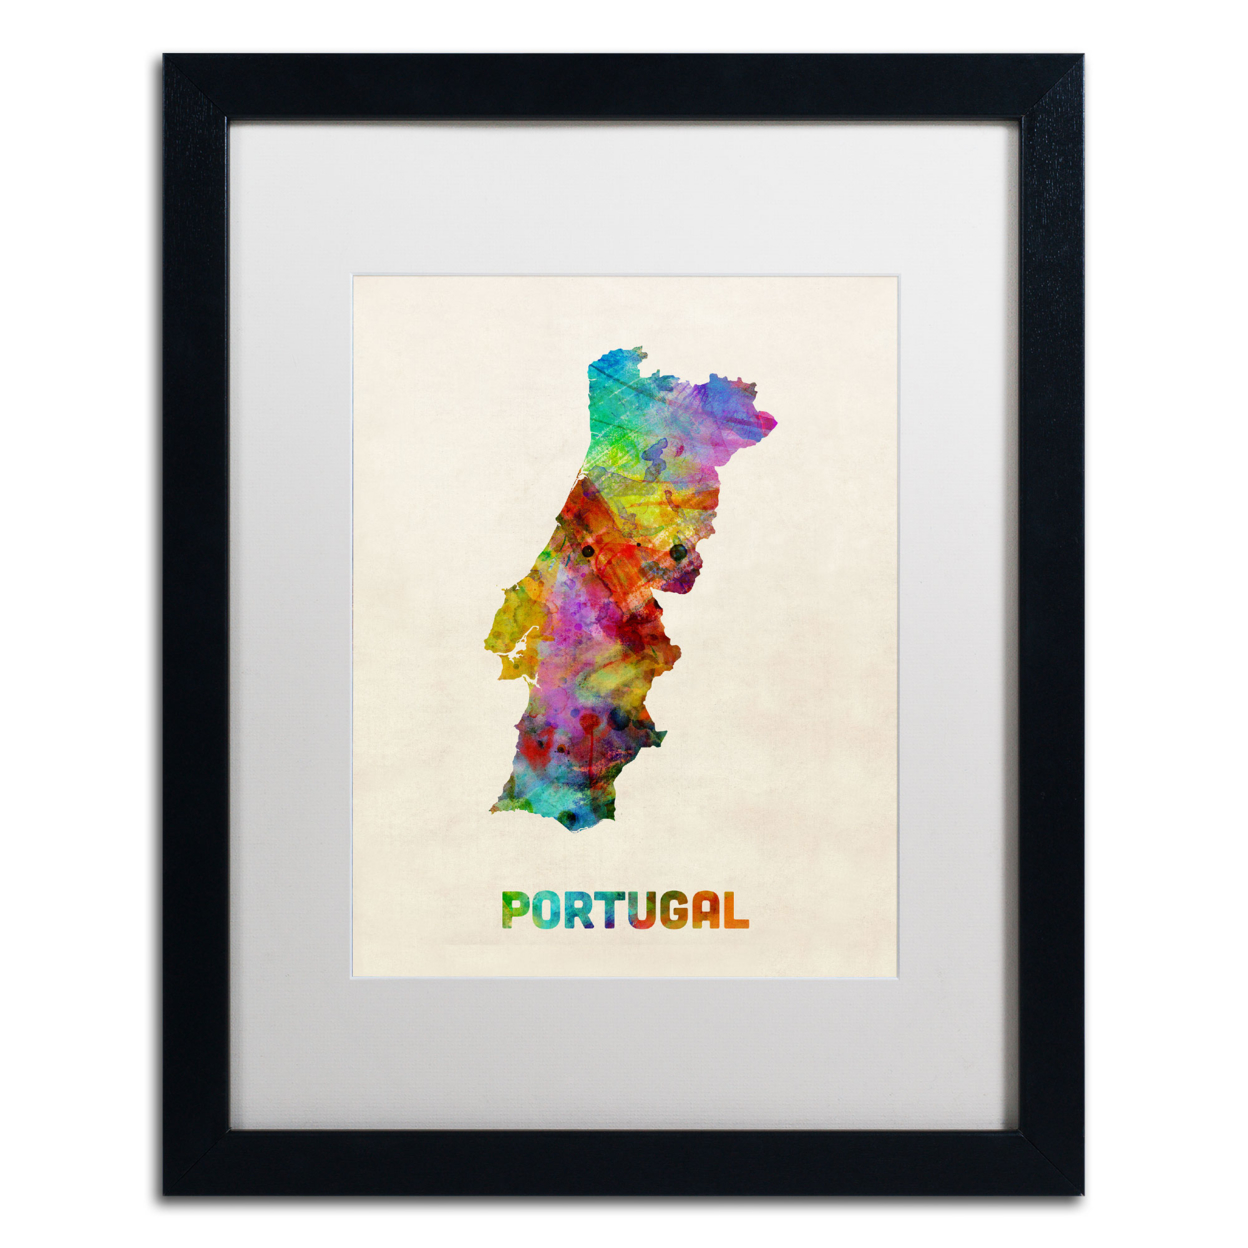 Michael Tompsett 'Portugal Watercolor Map' Black Wooden Framed Art 18 X 22 Inches